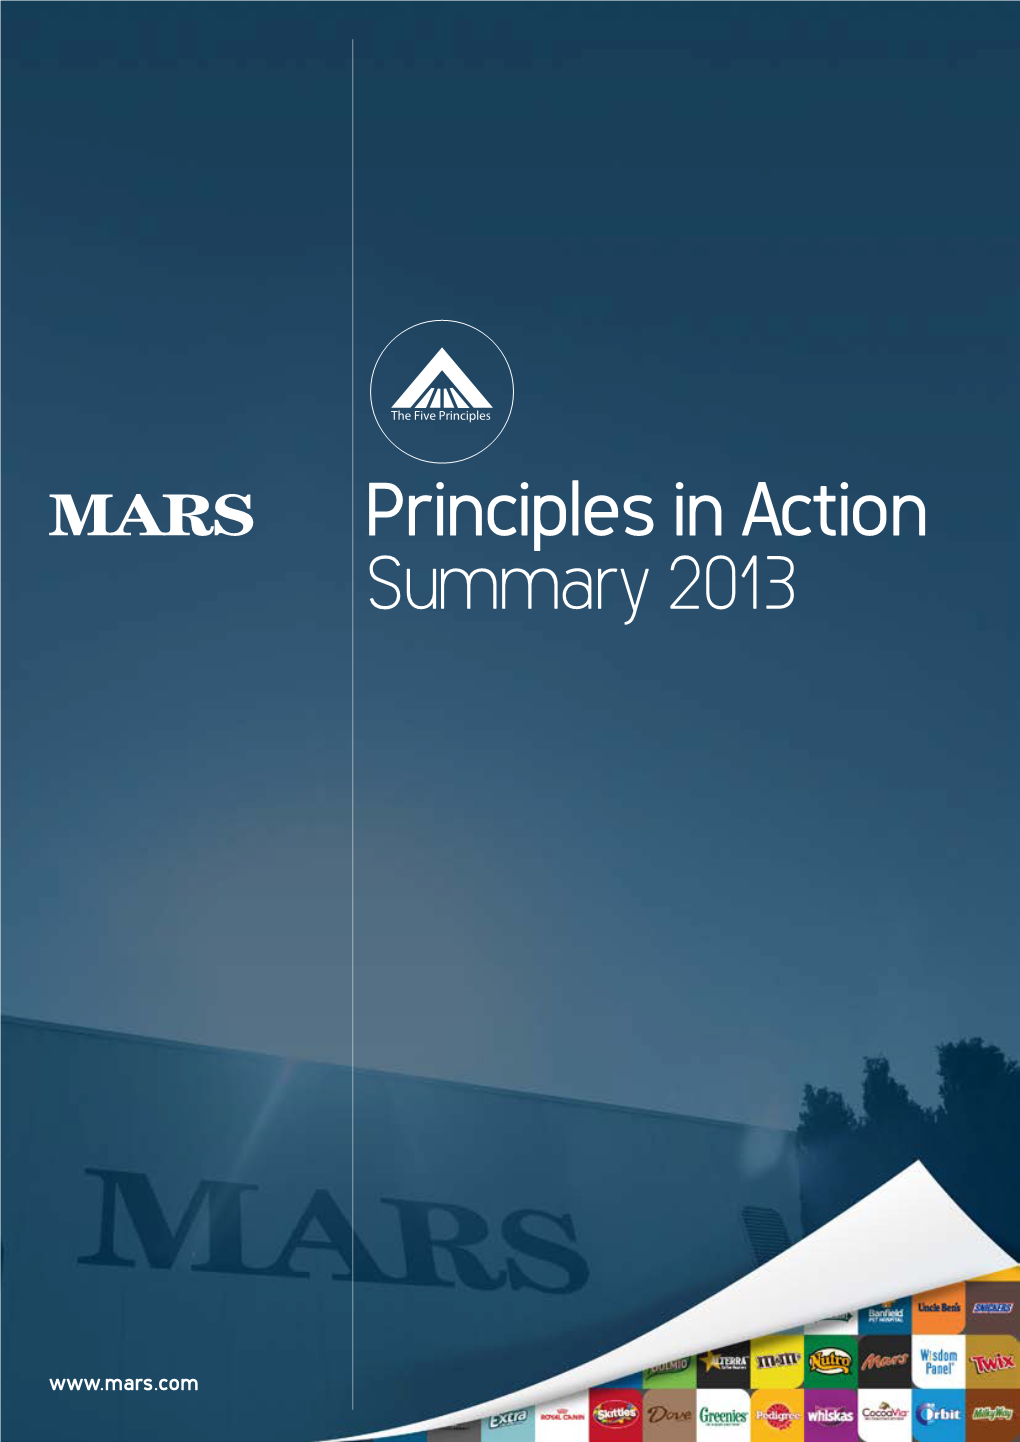 MARS Principles in Action Summary 2013 Introduction Our Approach Health & Wellness Supply Chain Operations Brands Working at Mars Contents